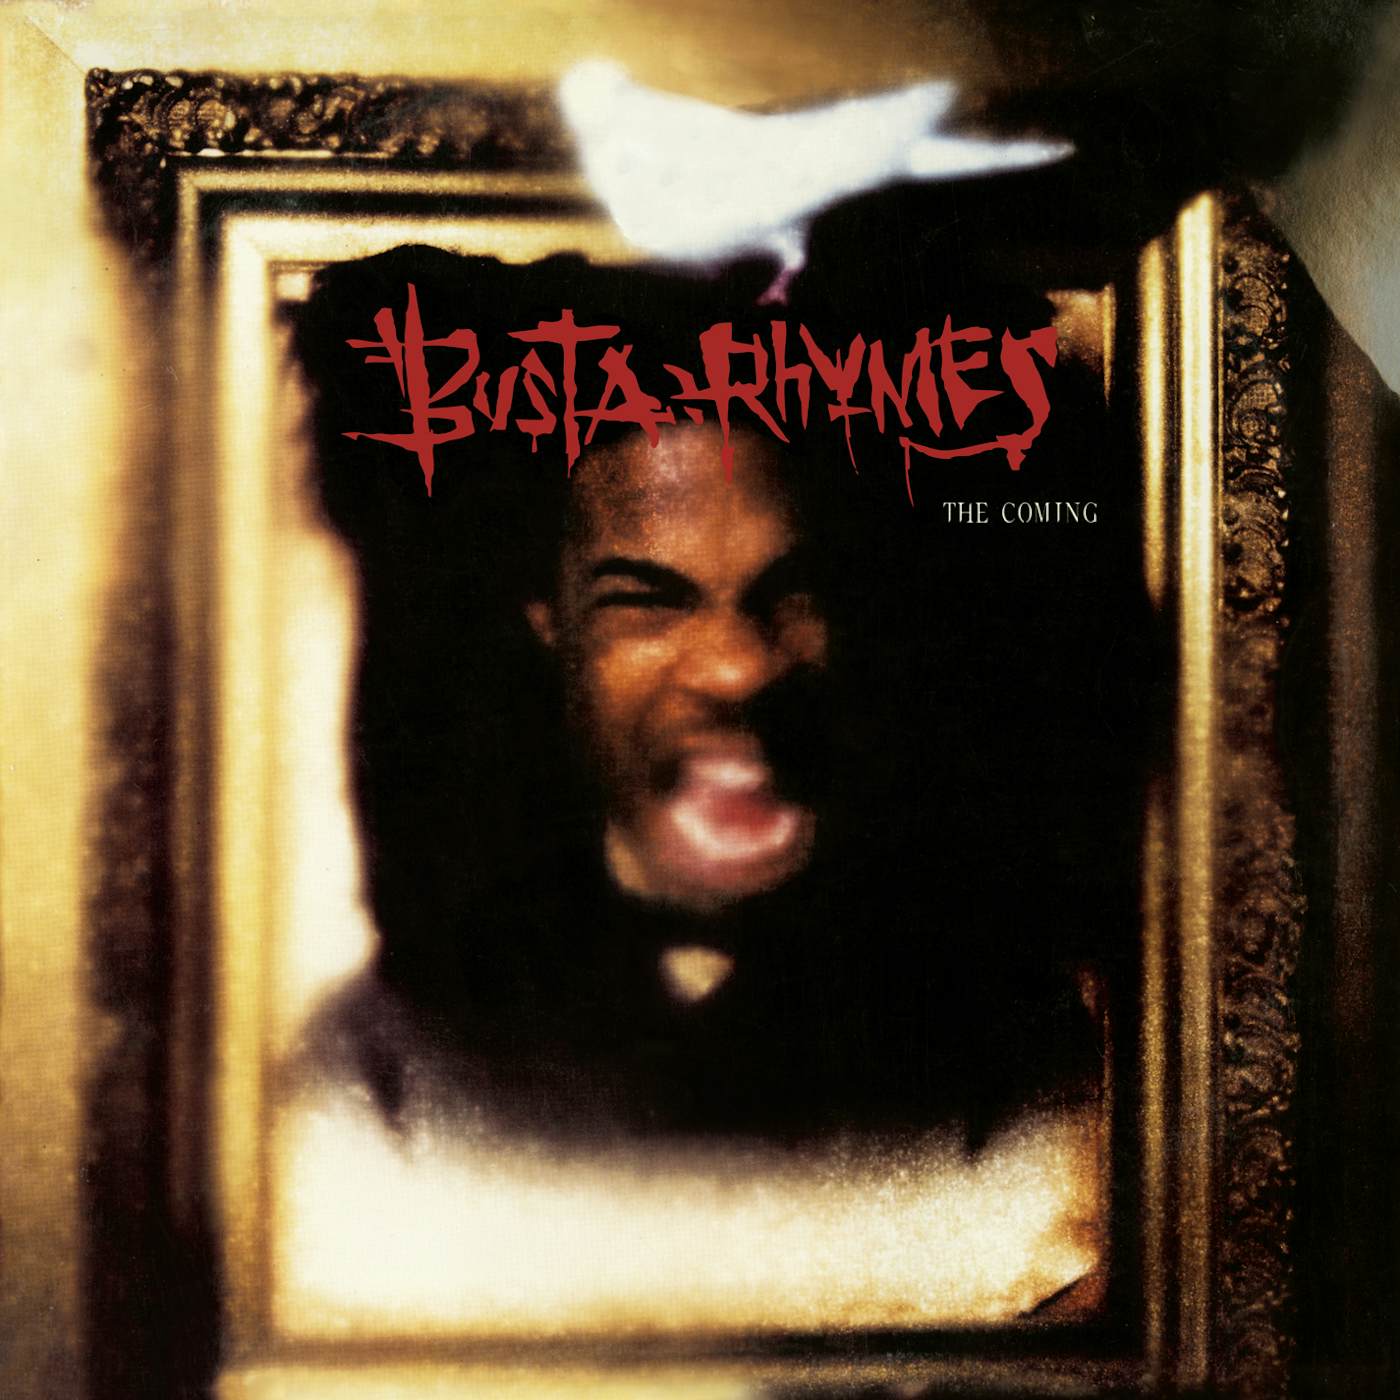 Busta Rhymes The Coming Vinyl Record